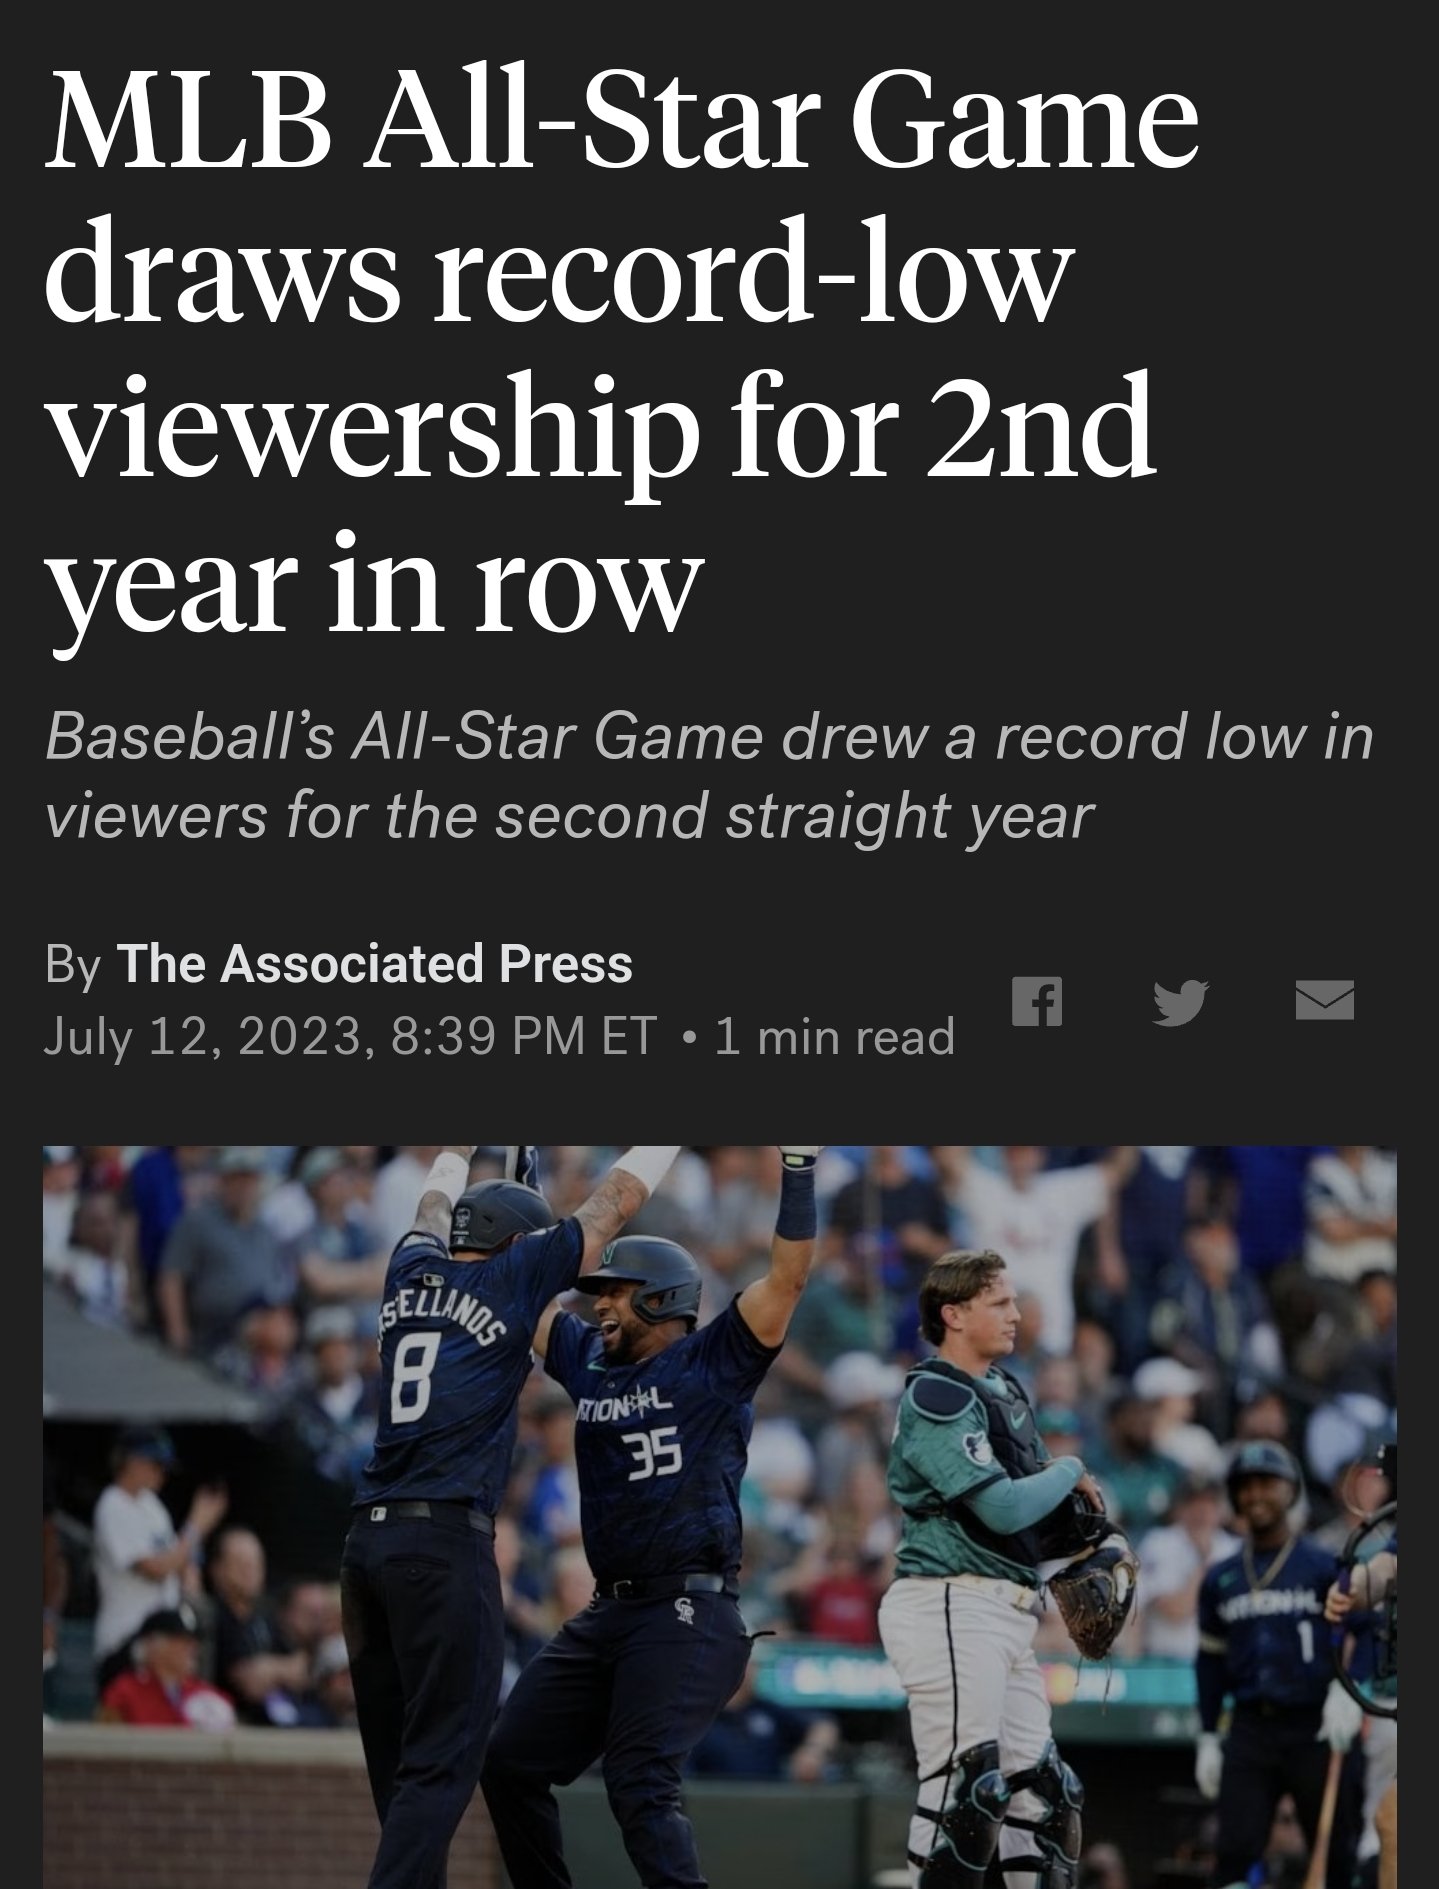 MLB All-Star Game draws record-low viewership for 2nd year in row